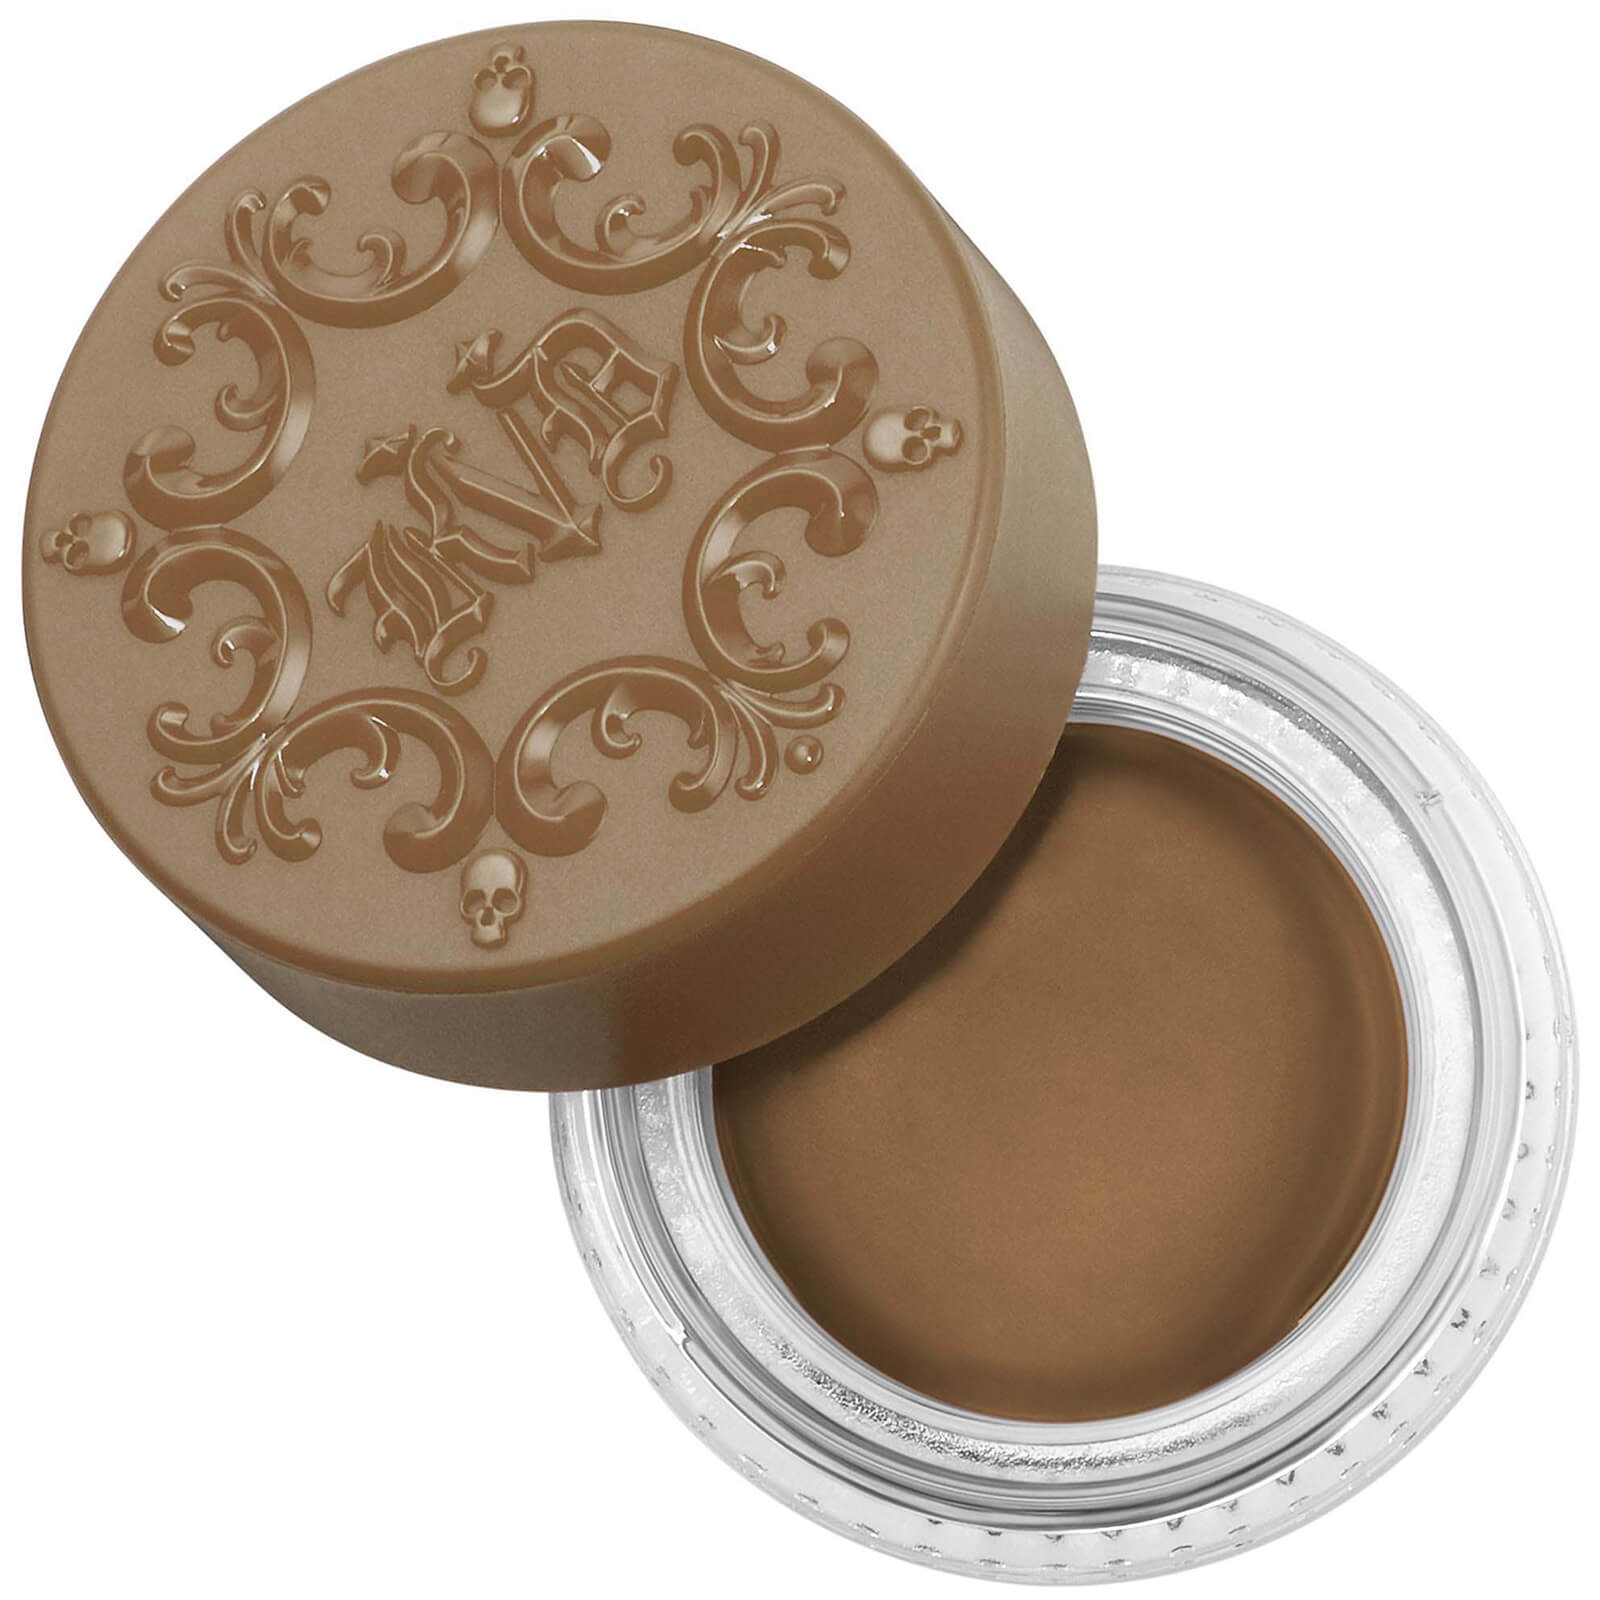 KVD Beauty 24-Hour Super Brow Long-Wear Pomade 5g (Various Shades) - Taupe